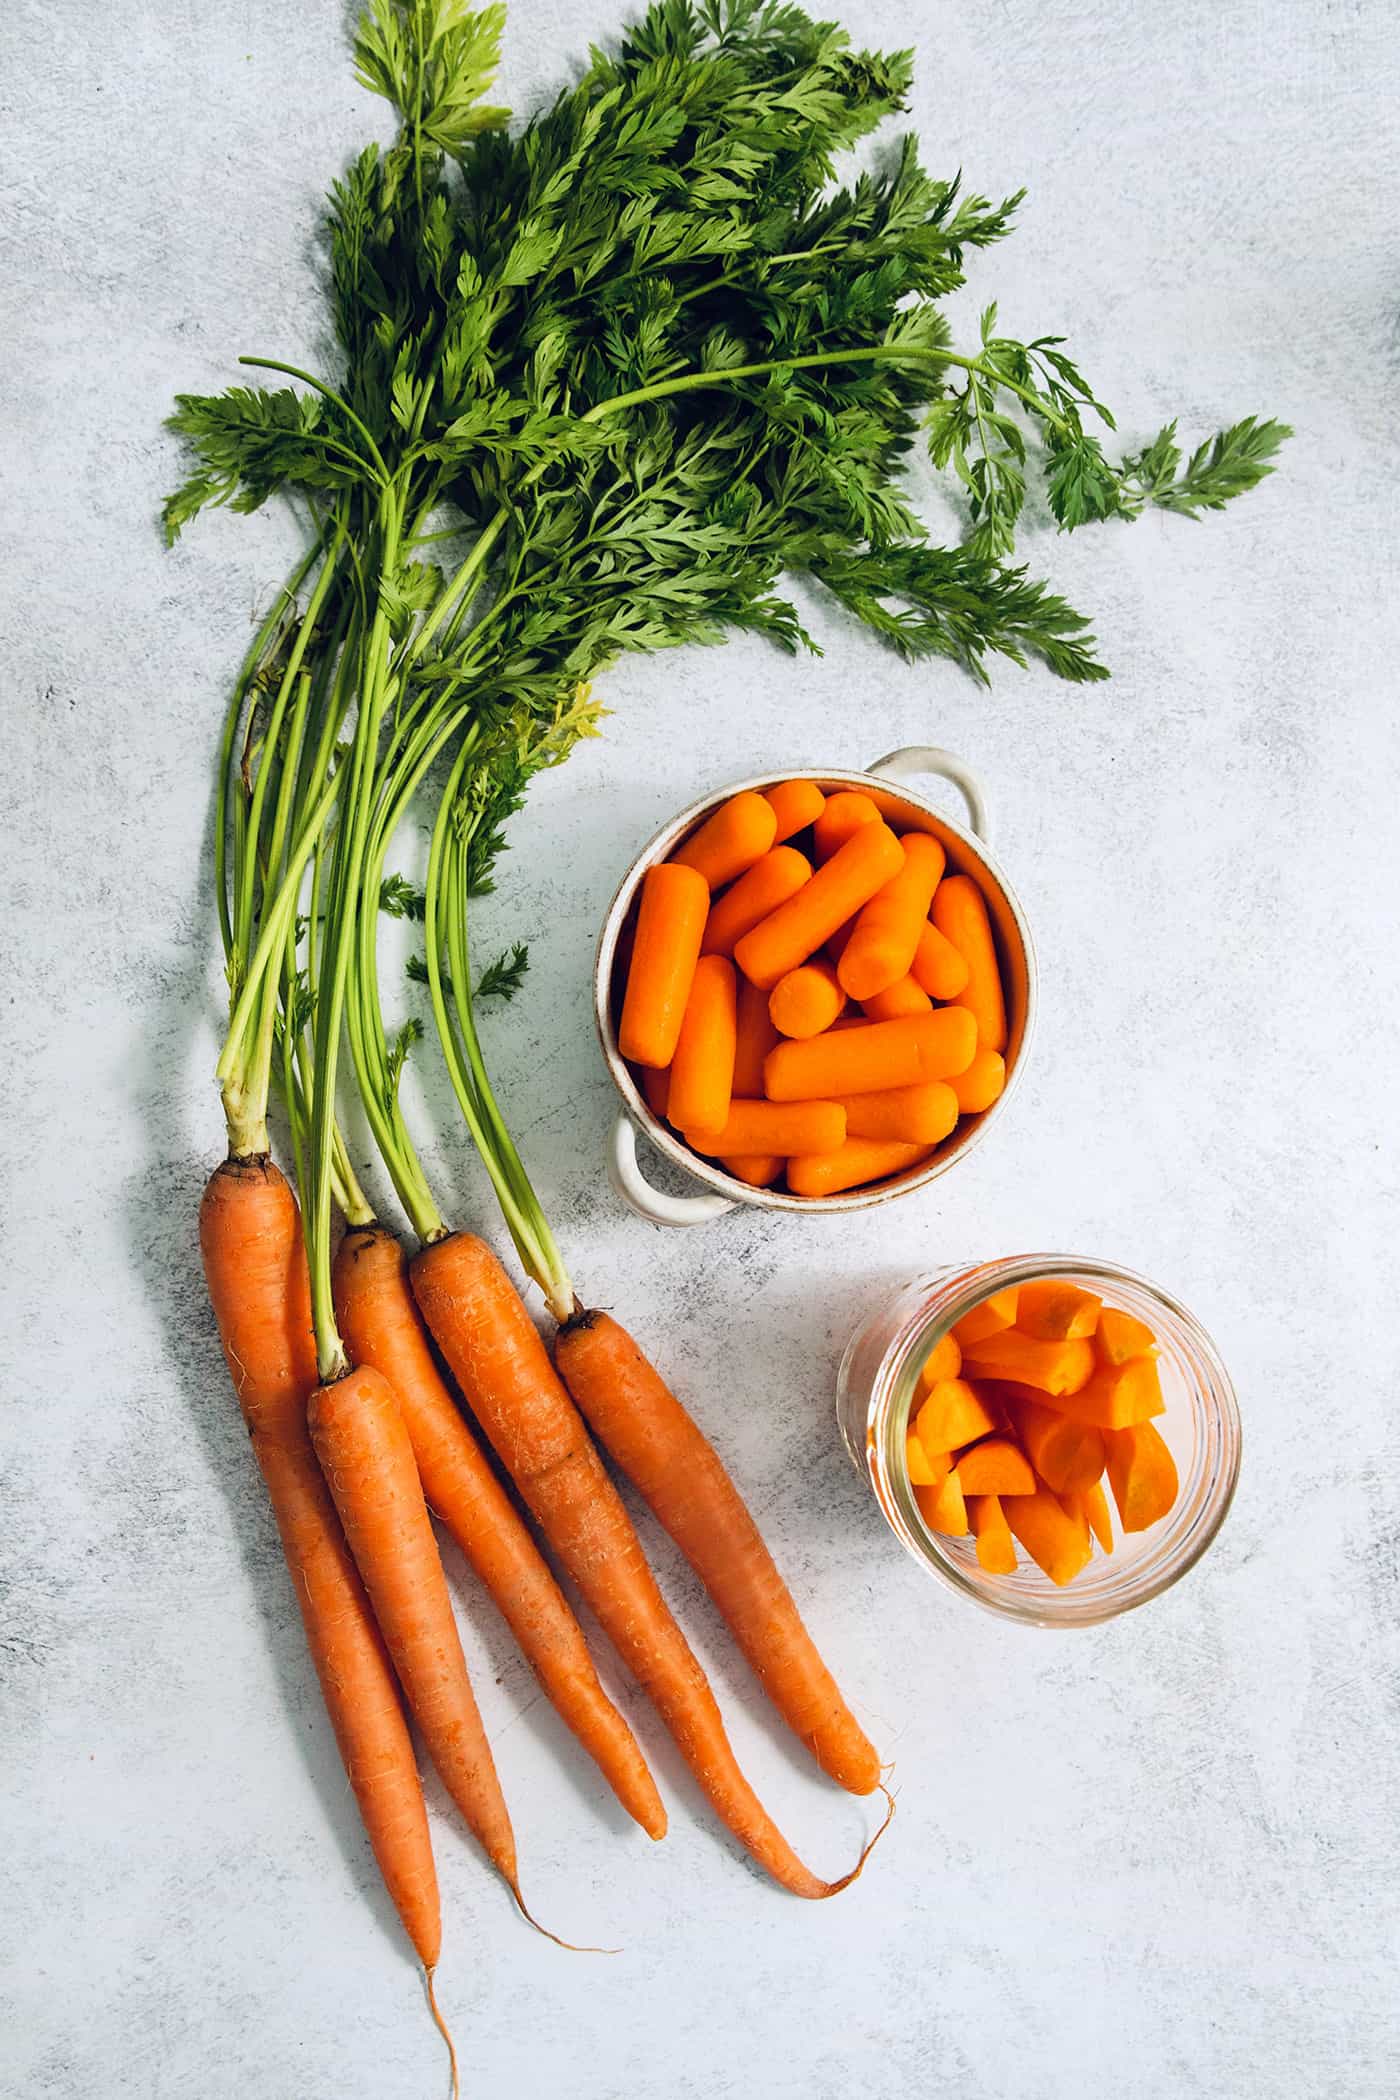 whole carrots with green tops, bagged carrots, and cut carrots